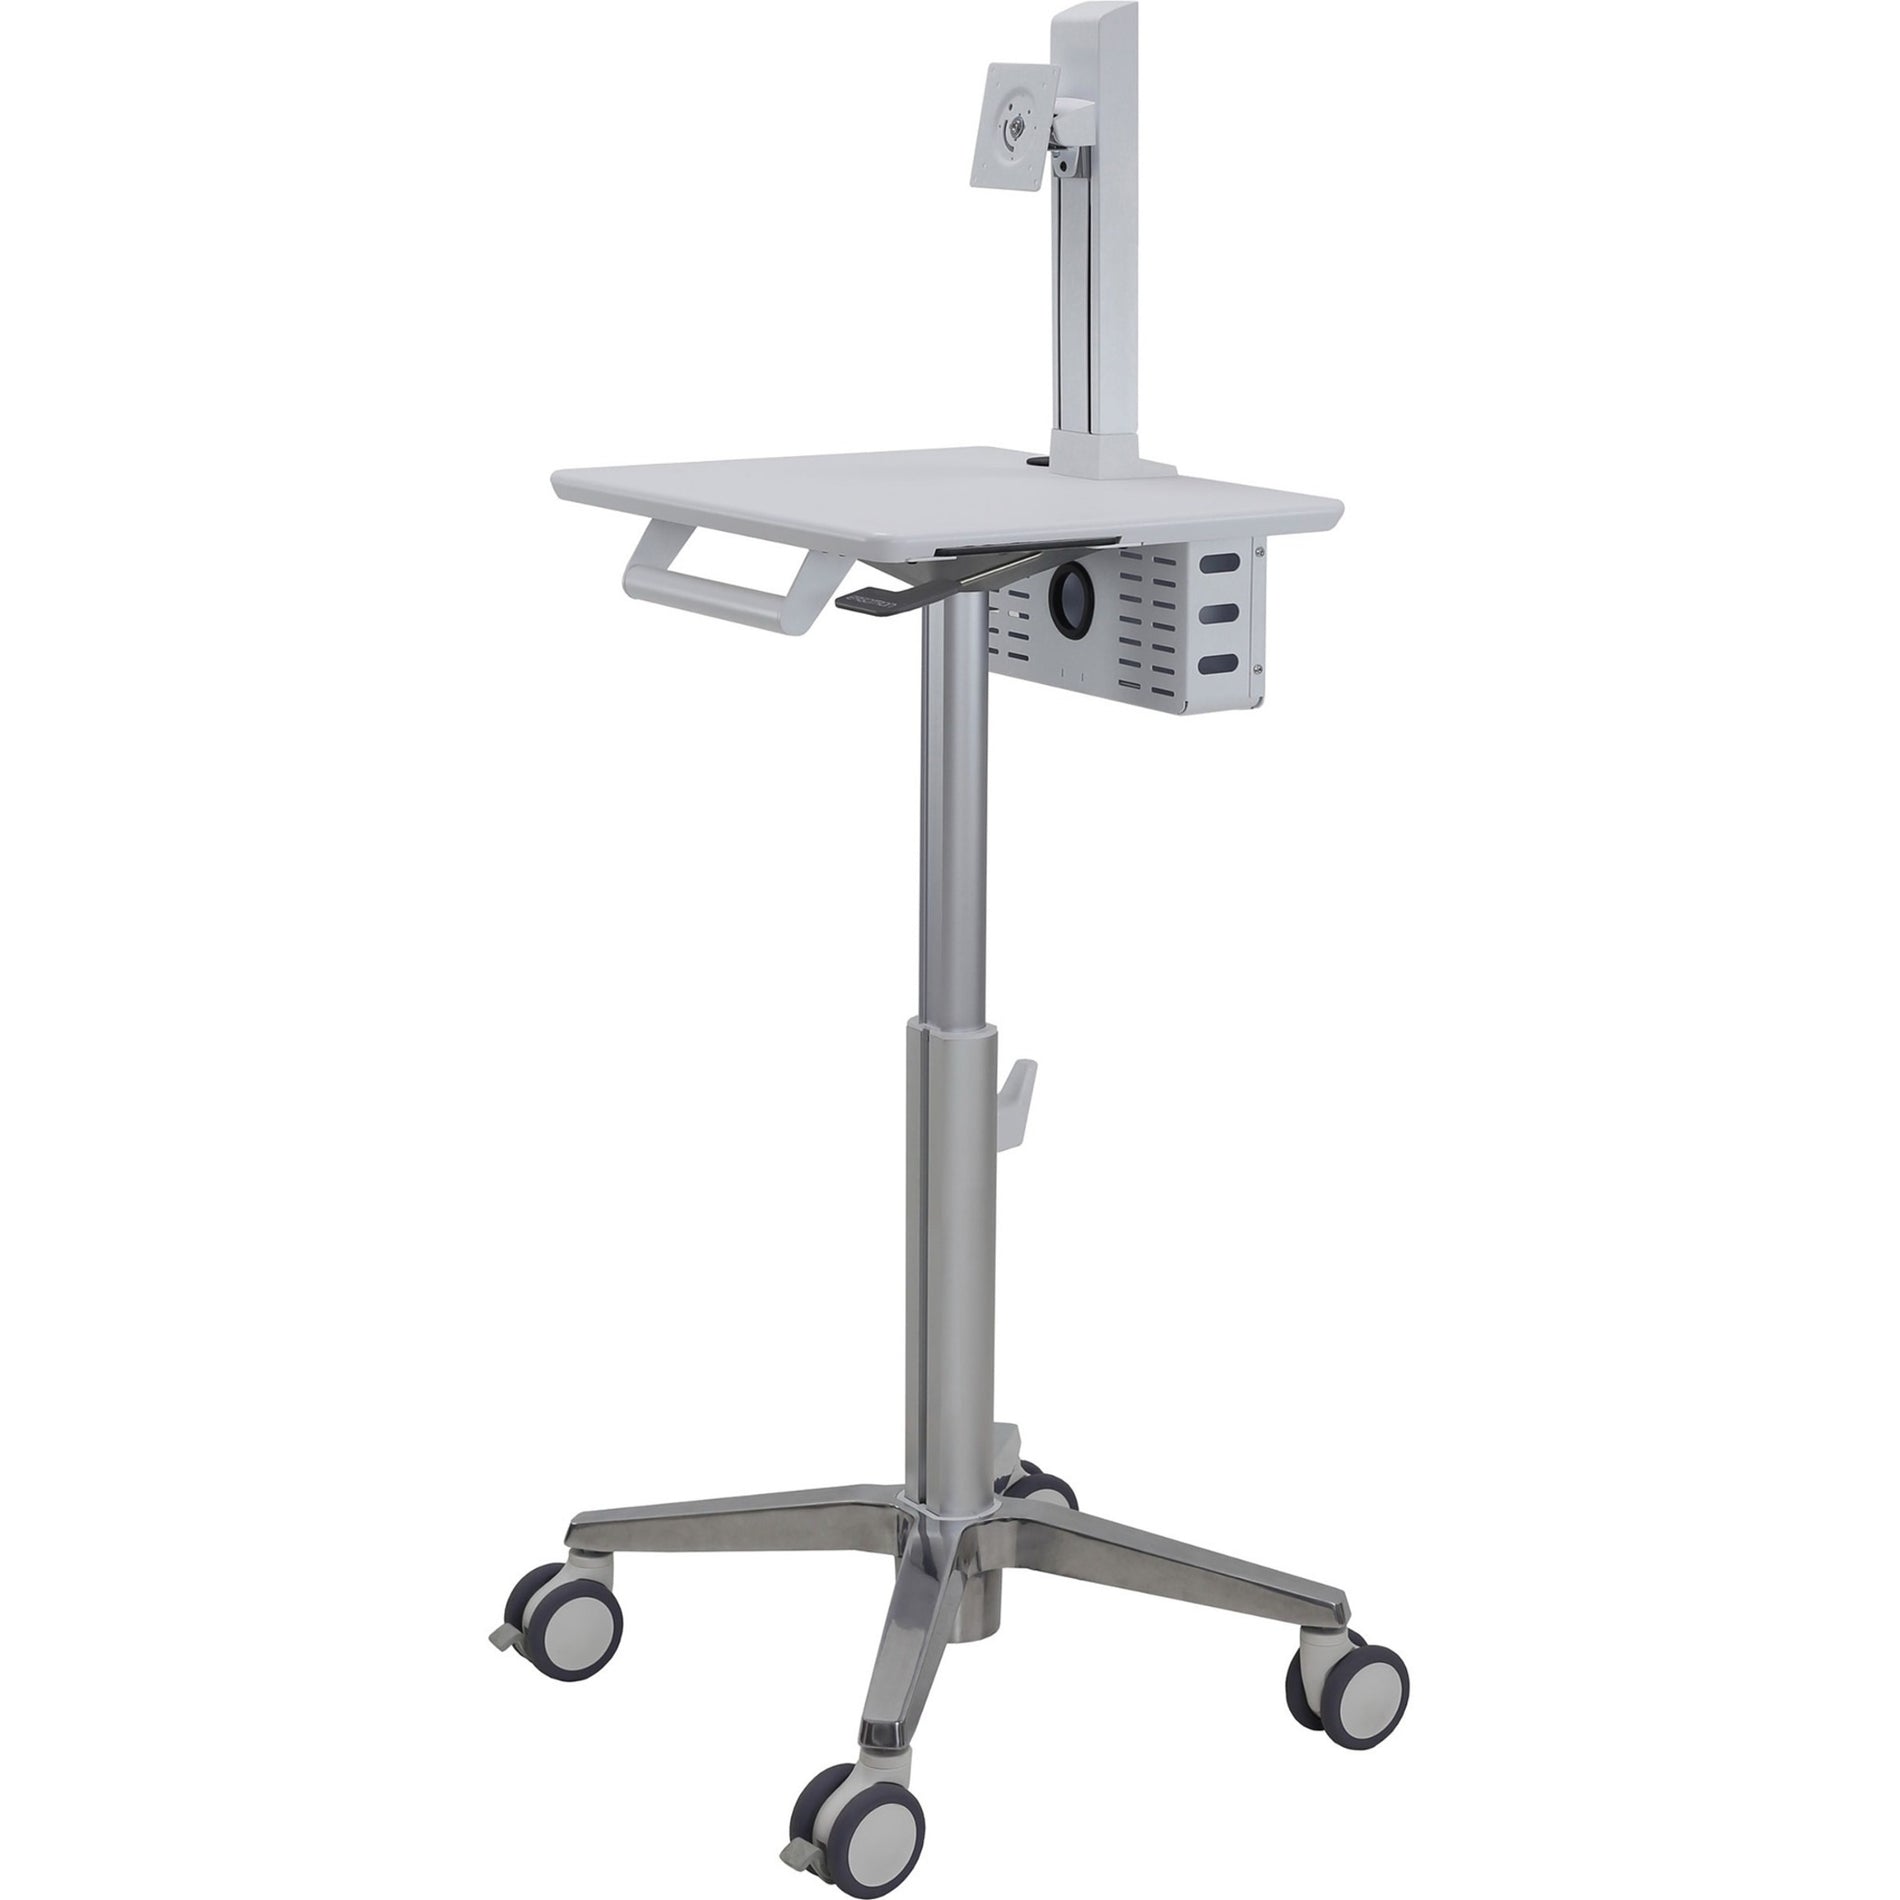 Ergotron SV10-1300-0 StyleView Lean WOW Cart, Lightweight Medical Cart with Sliding Mouse Tray, Cable Management, and Adjustable Height